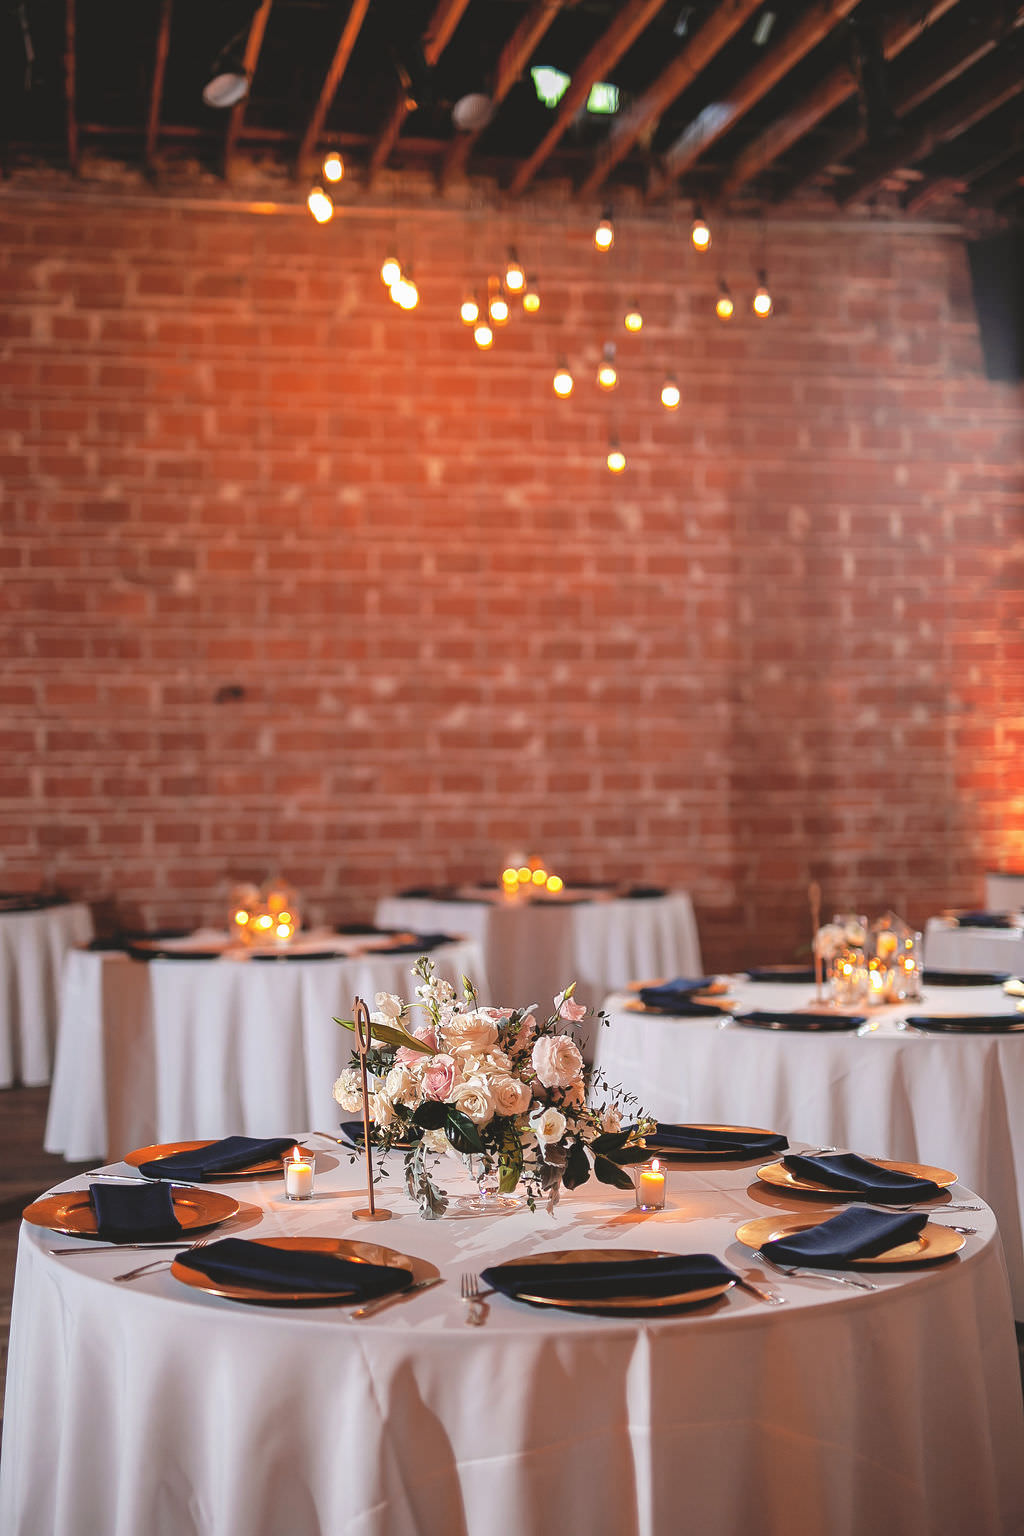 Classic Indoor Reception and Wedding Decor with Round Tables with White Linens, Navy Blue Napkins Low Floral Centerpieces, Ivory, Blush Pink, Flowers with Greenery, Gold Chargers | Tampa Bay Wedding Venue NOVA 535